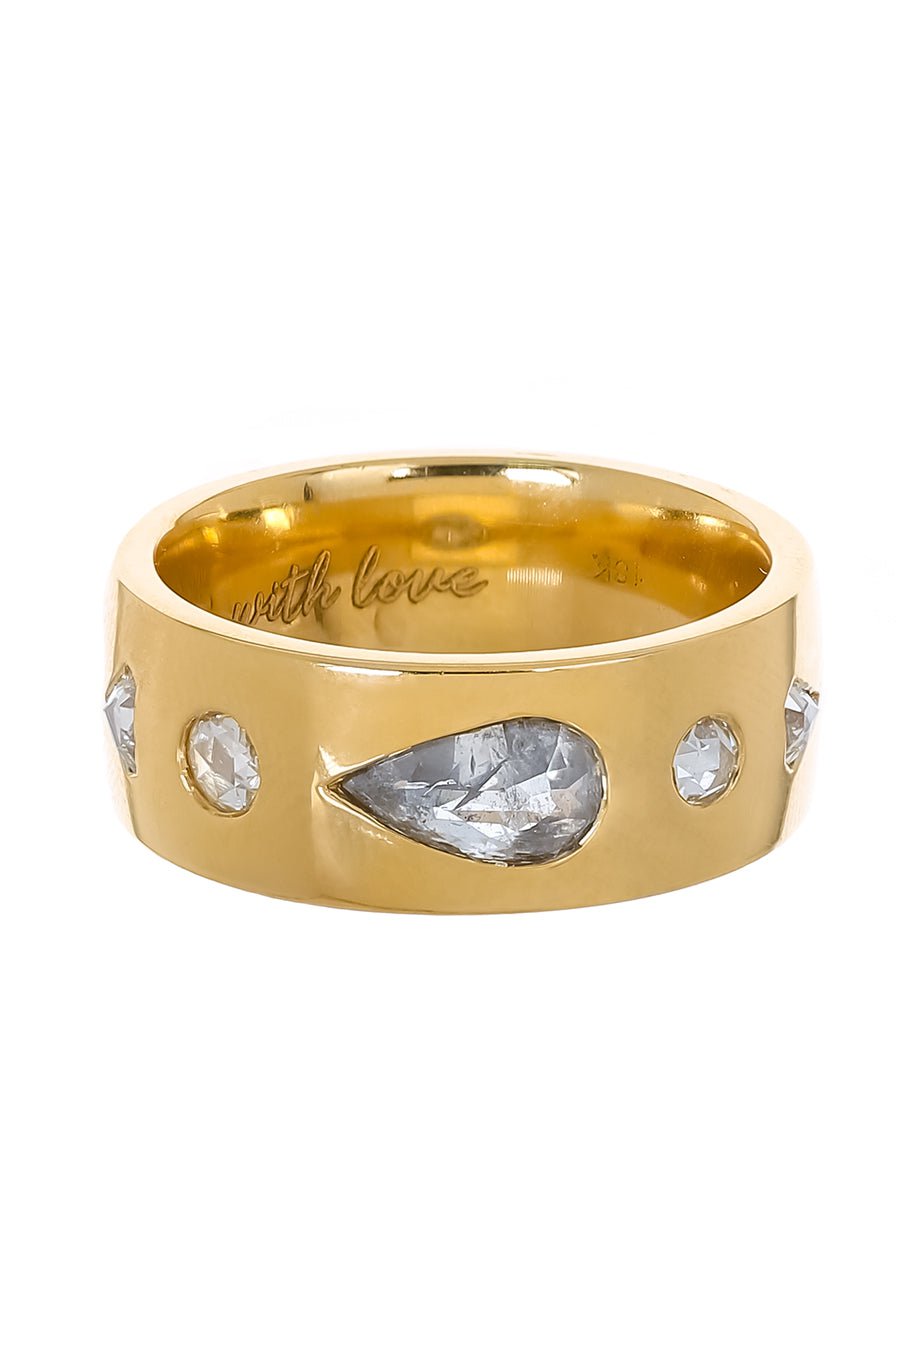 WITH LOVE-Rustic Pear Ring-YELLOW GOLD